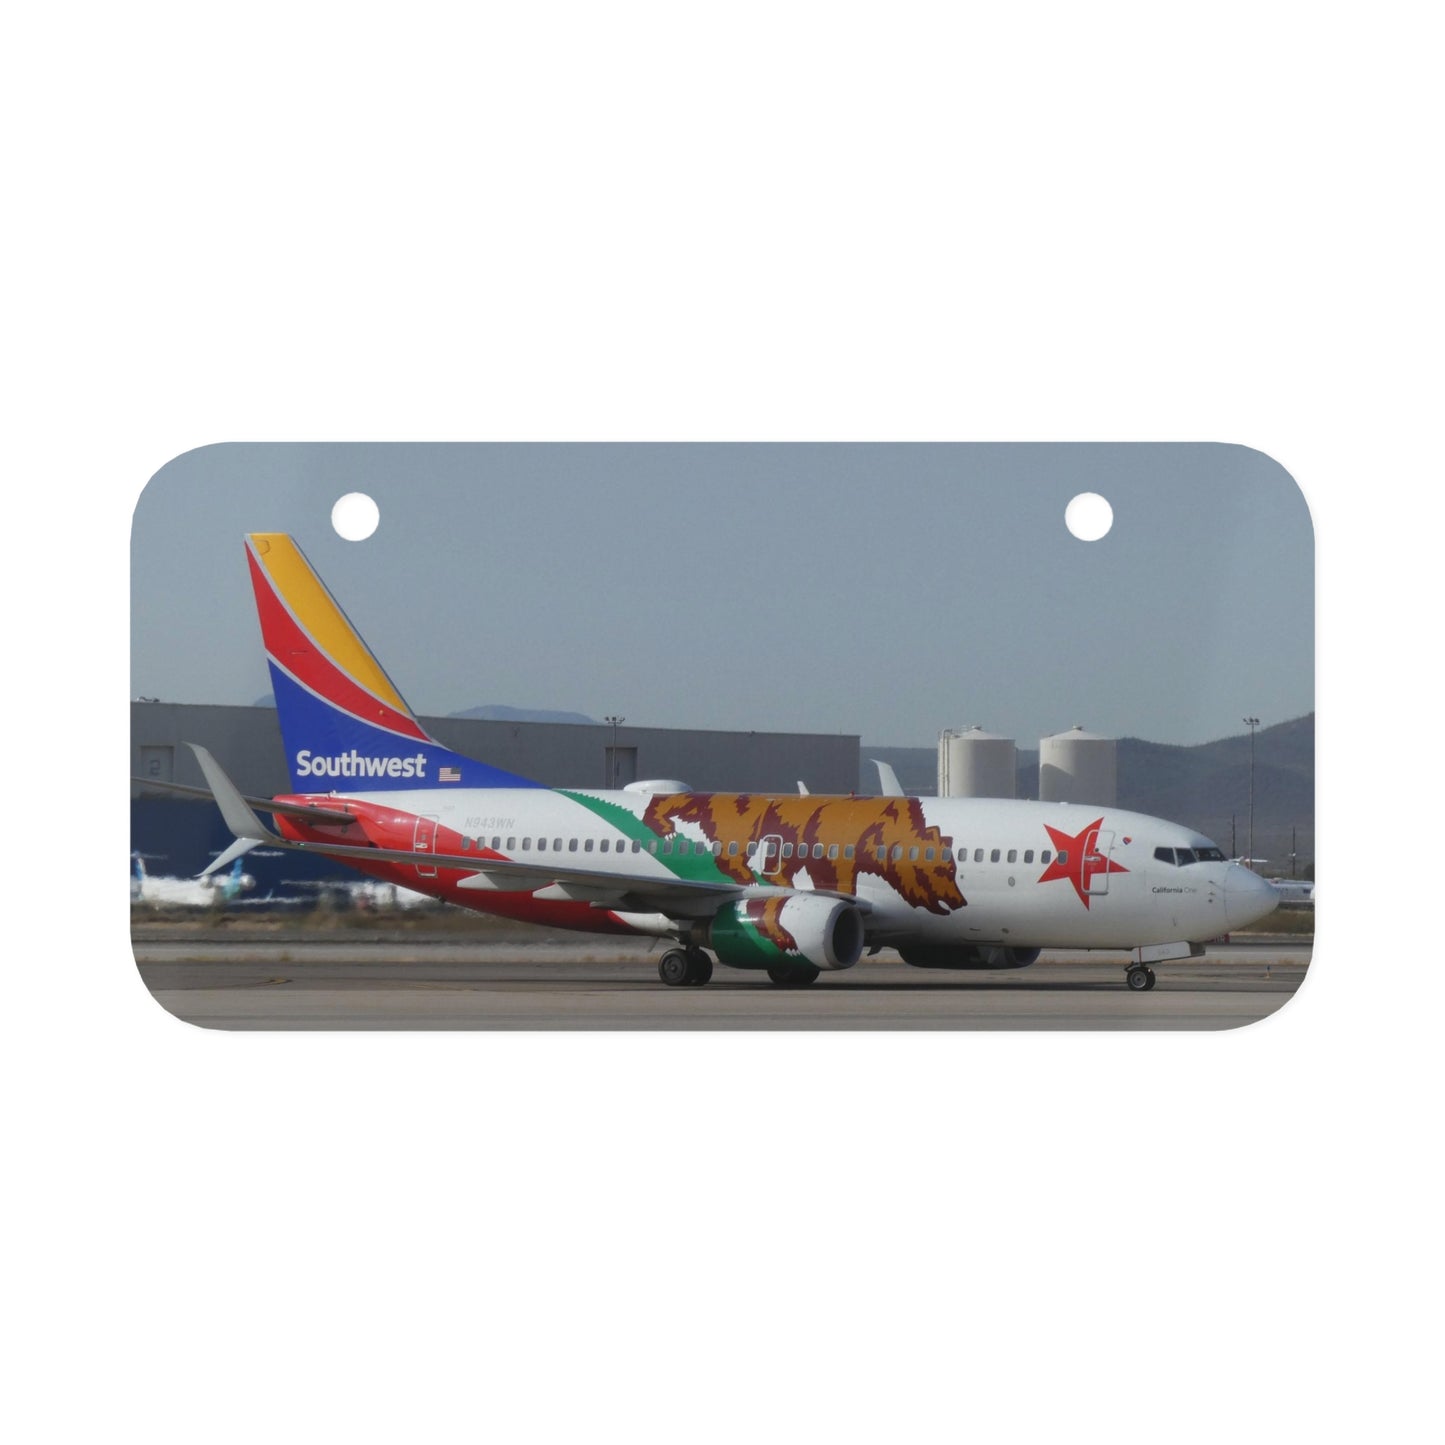 Southwest Airlines "California One" Livery Collector's Plate